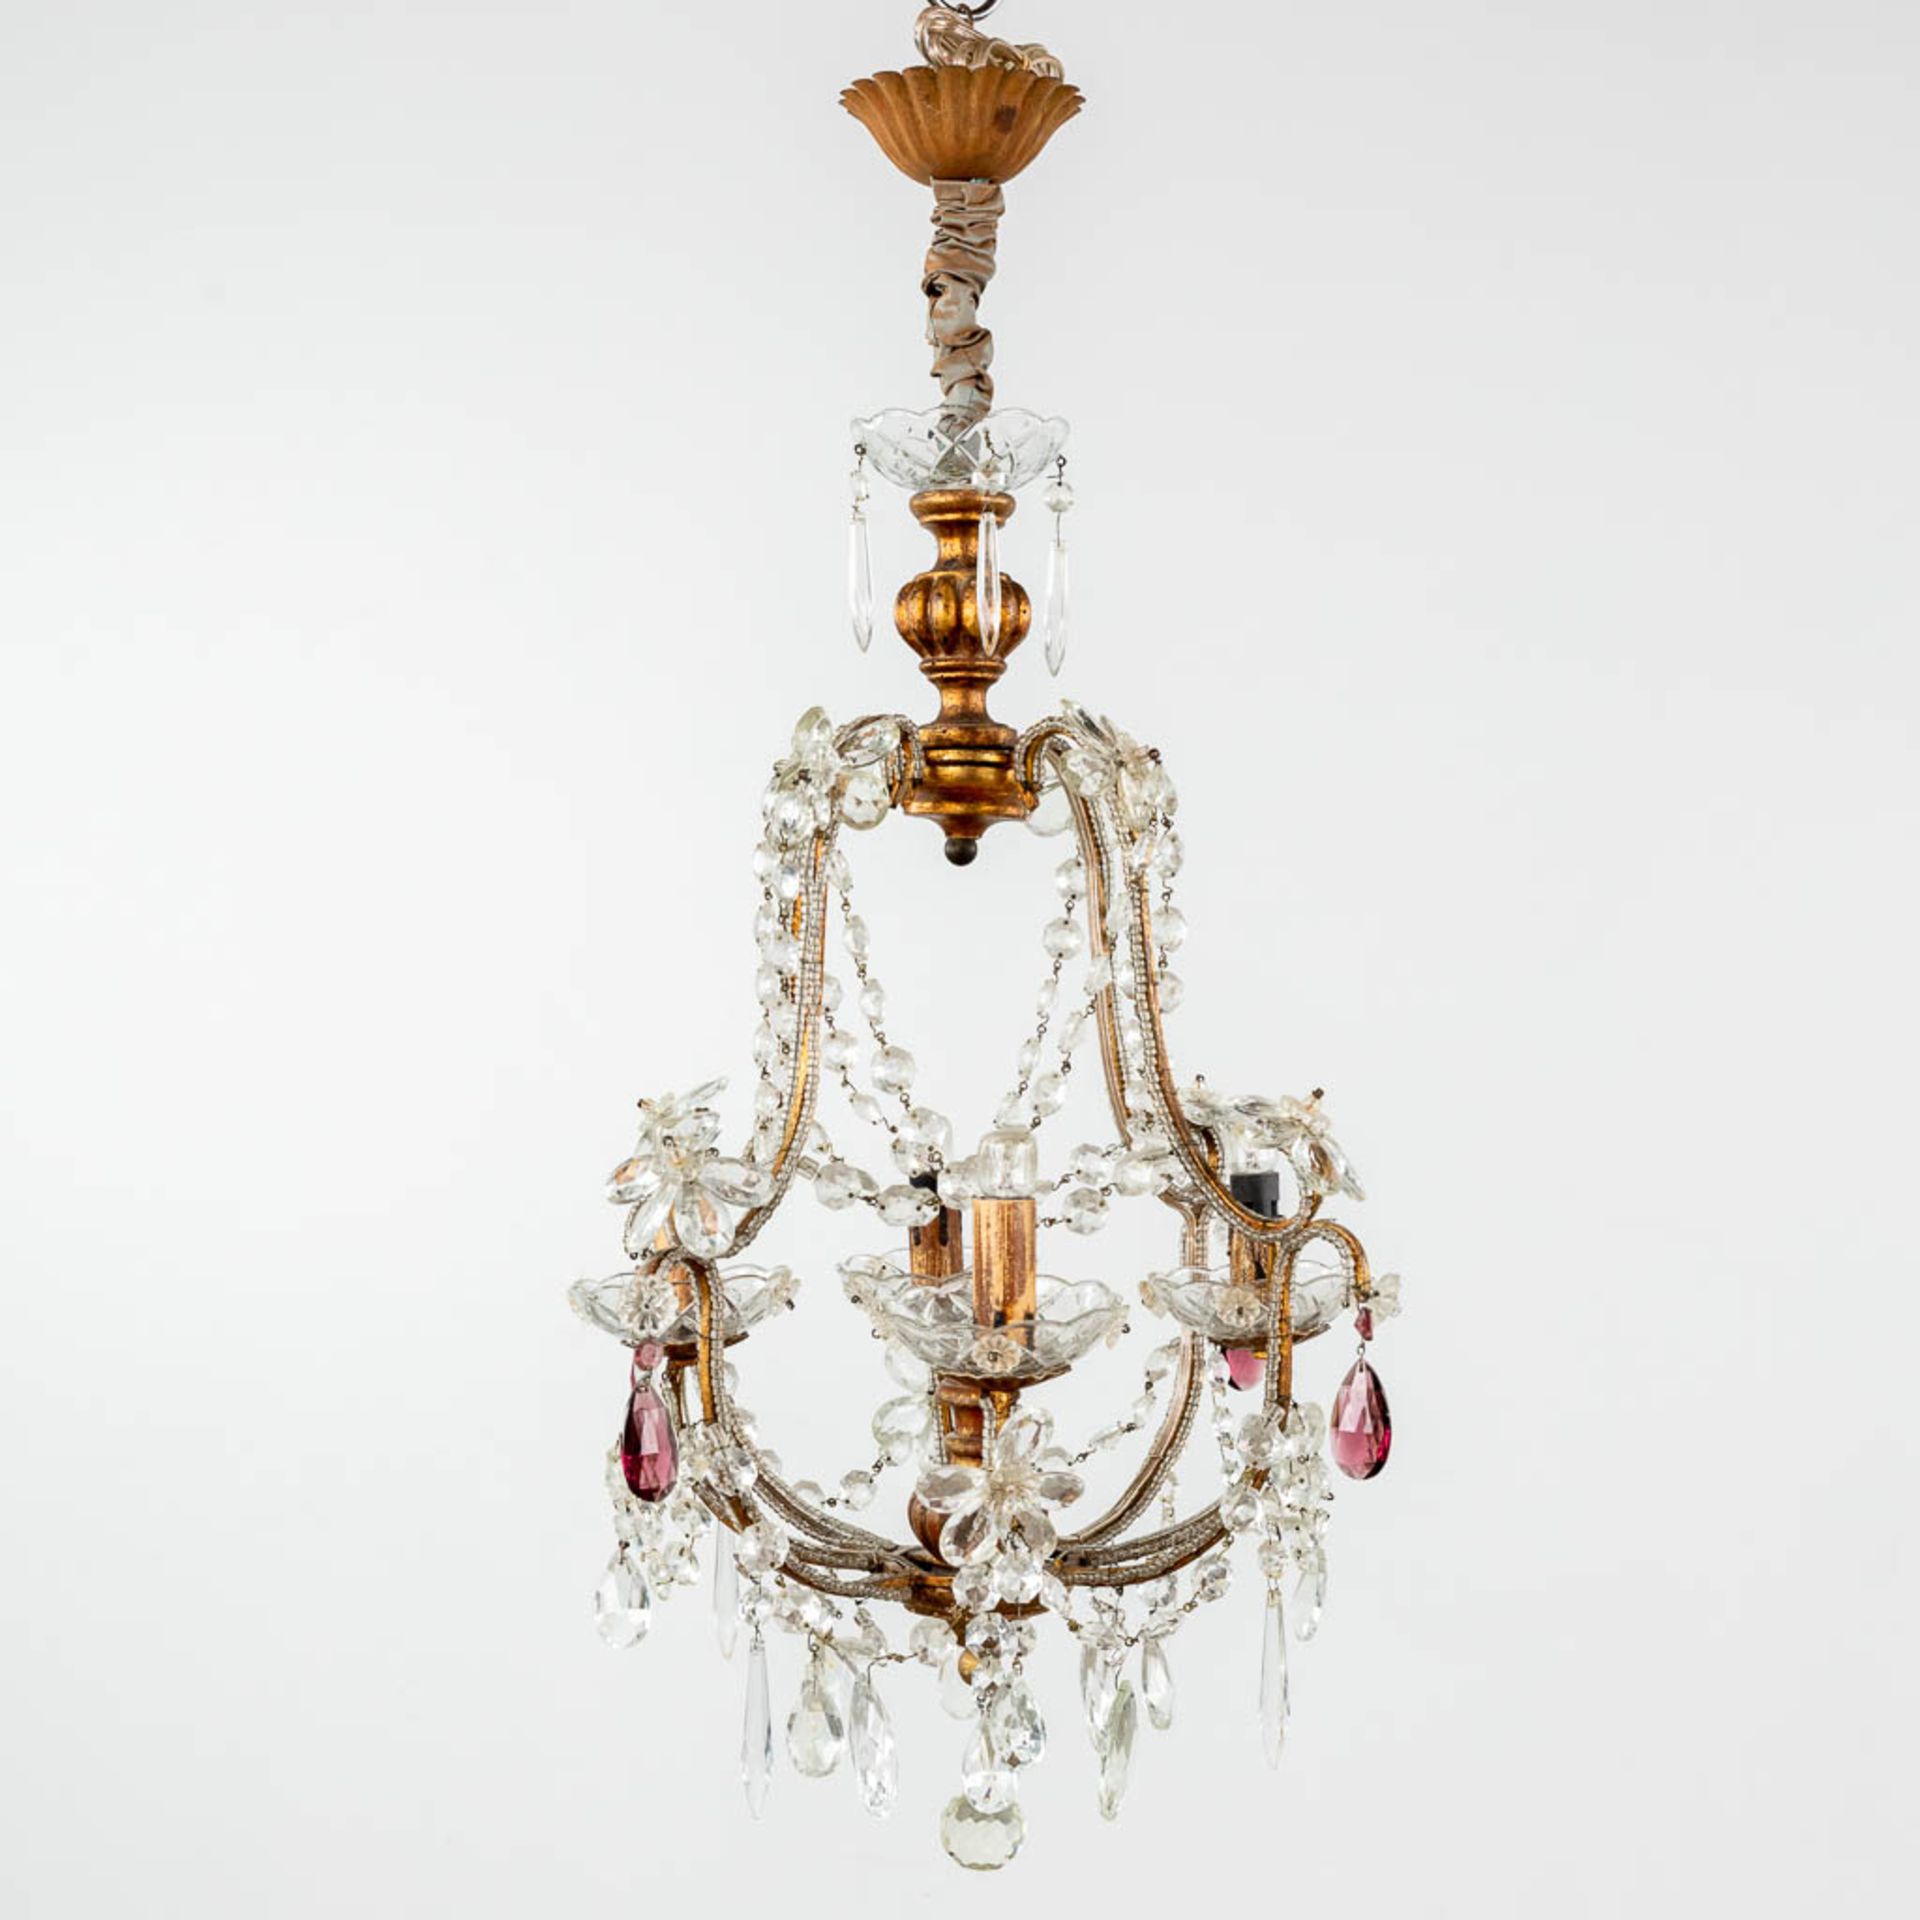 A decorative chandelier, brass and coloured glass. (H: 65 x D: 36 cm)